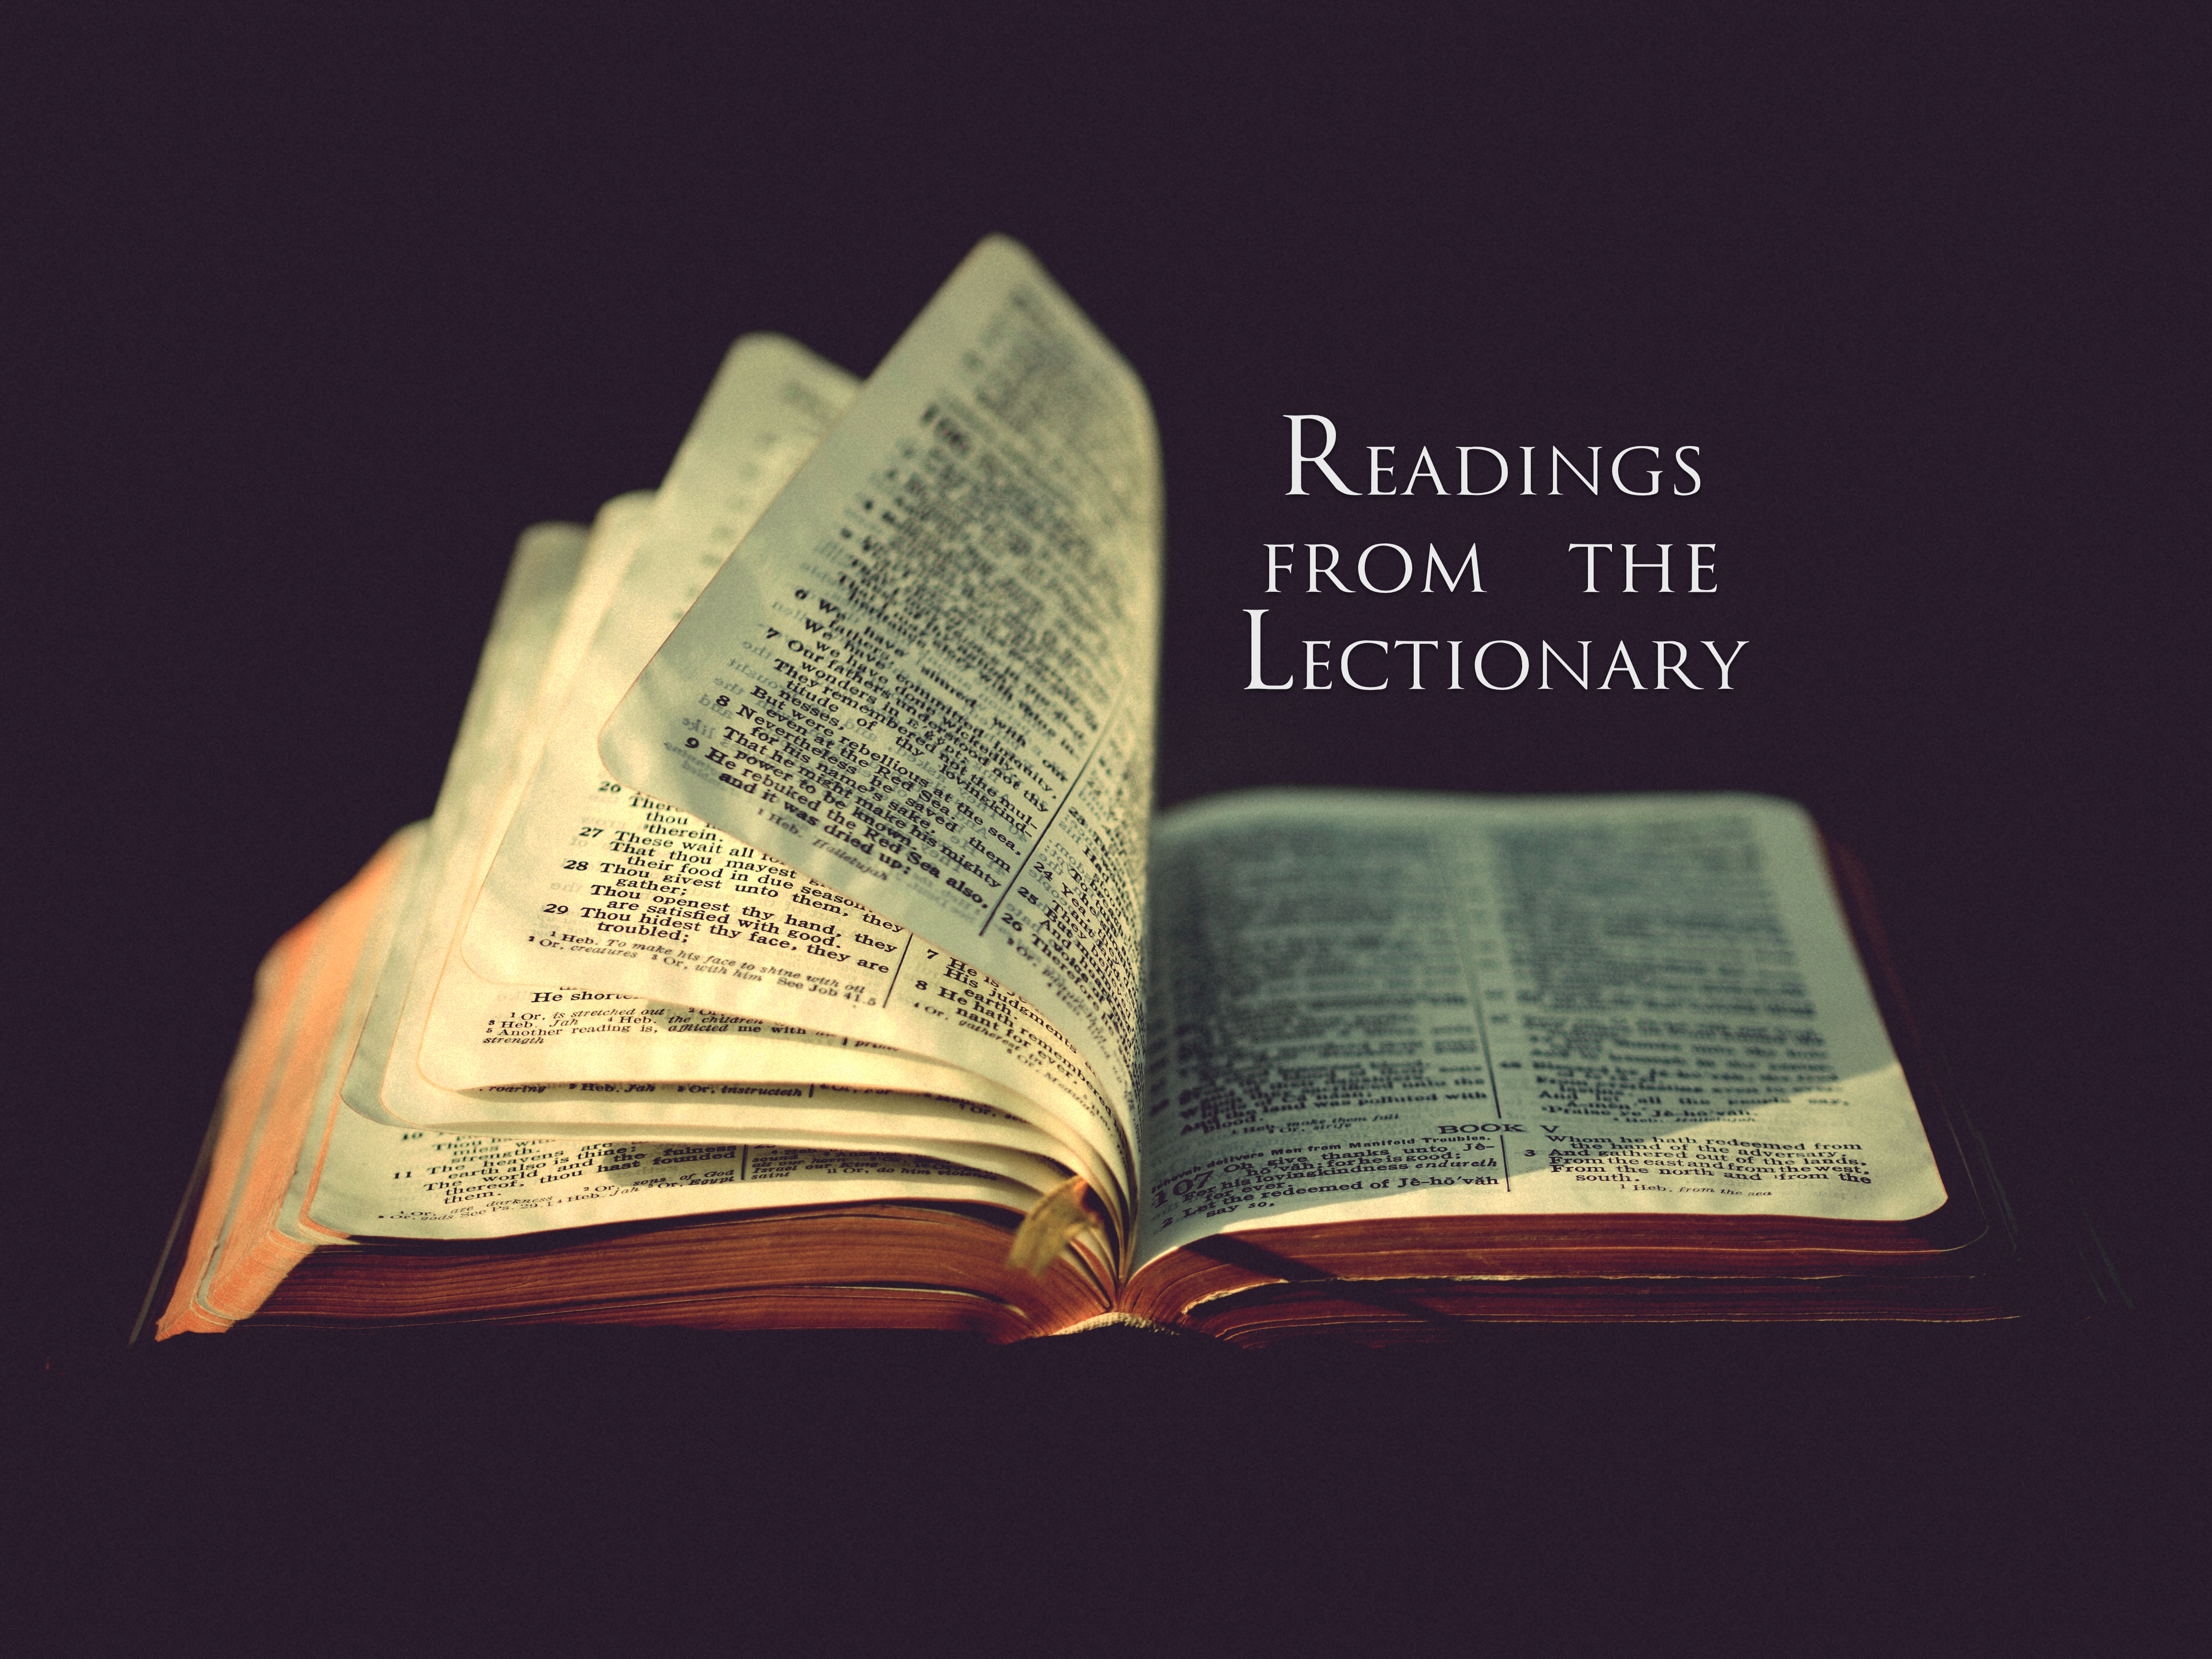 Readings From the Lectionary